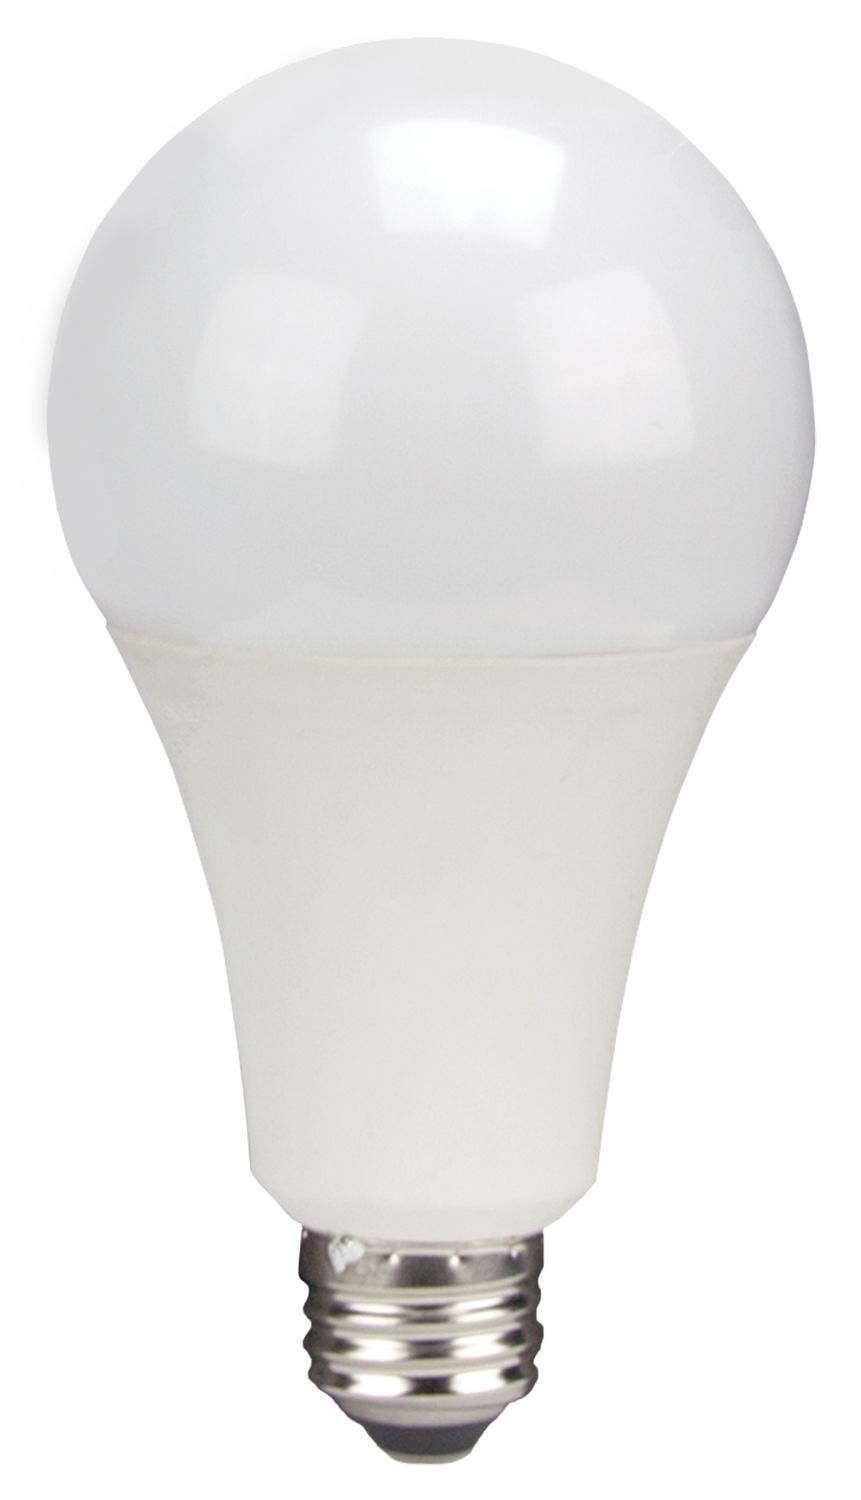 LED 120-277V Lamp A23, 18W, 125W Equivalent, 4000K, 2100LU, E26 Base, Non Dimmable, 25,000 Hours, Suitable for Damp Locations, Omni-Directional, Frost